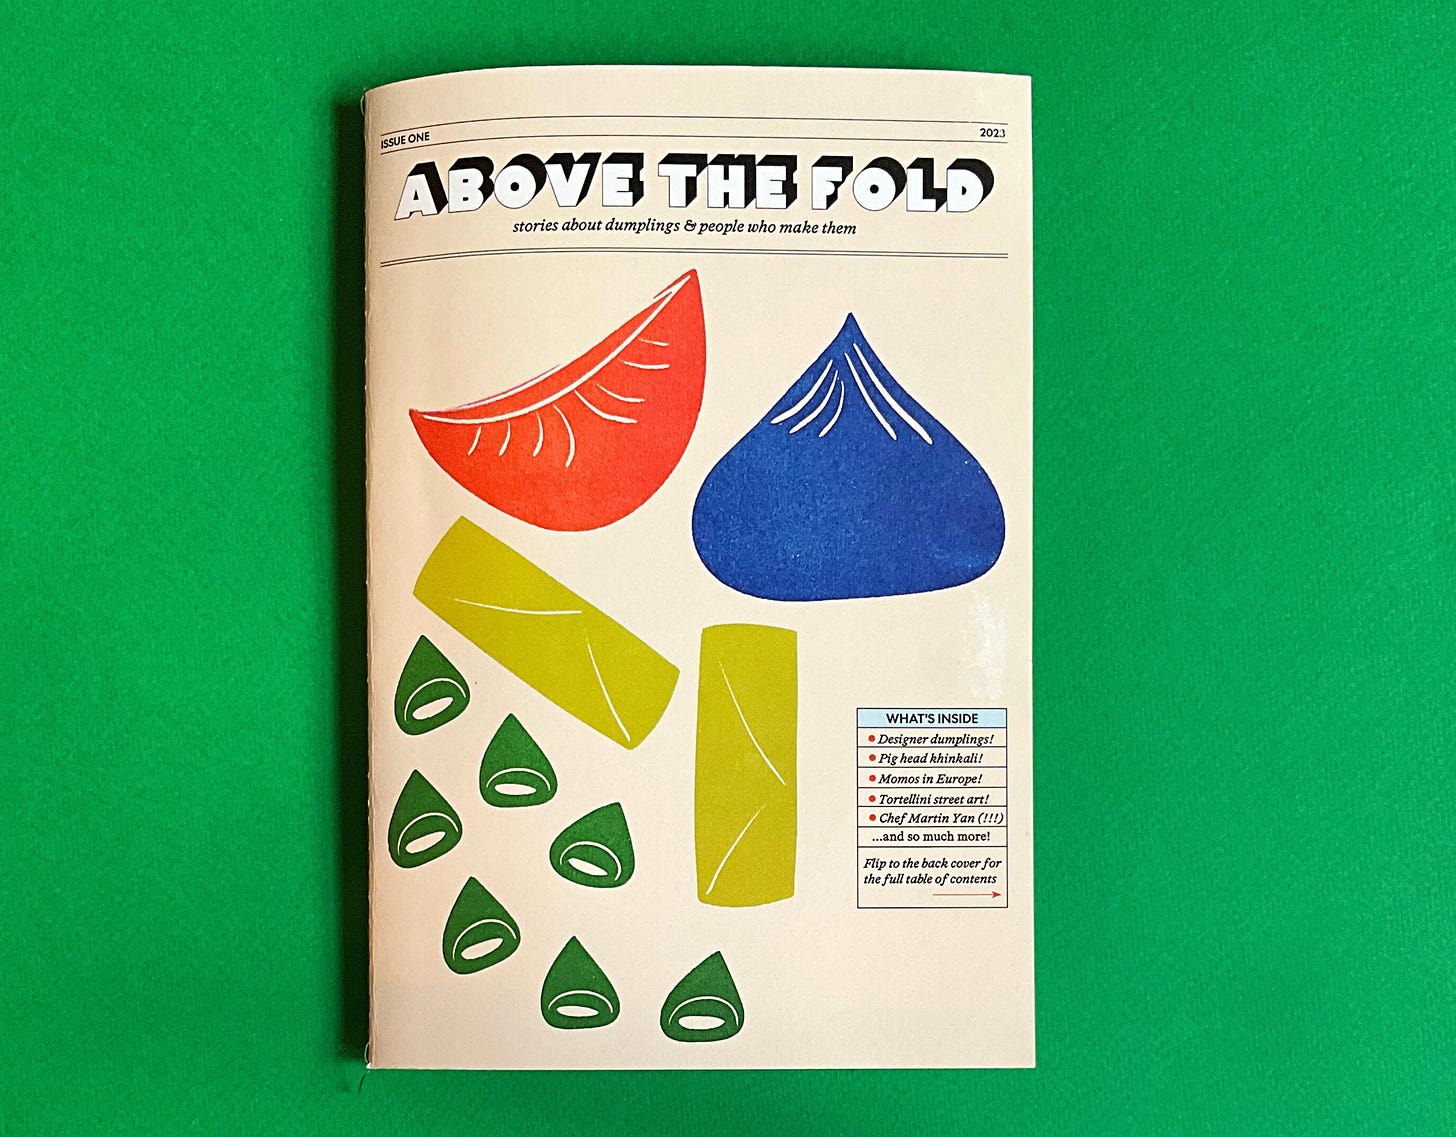 The cover of the first print issue of Above the Fold, which is covered with illustrations of dumplings 